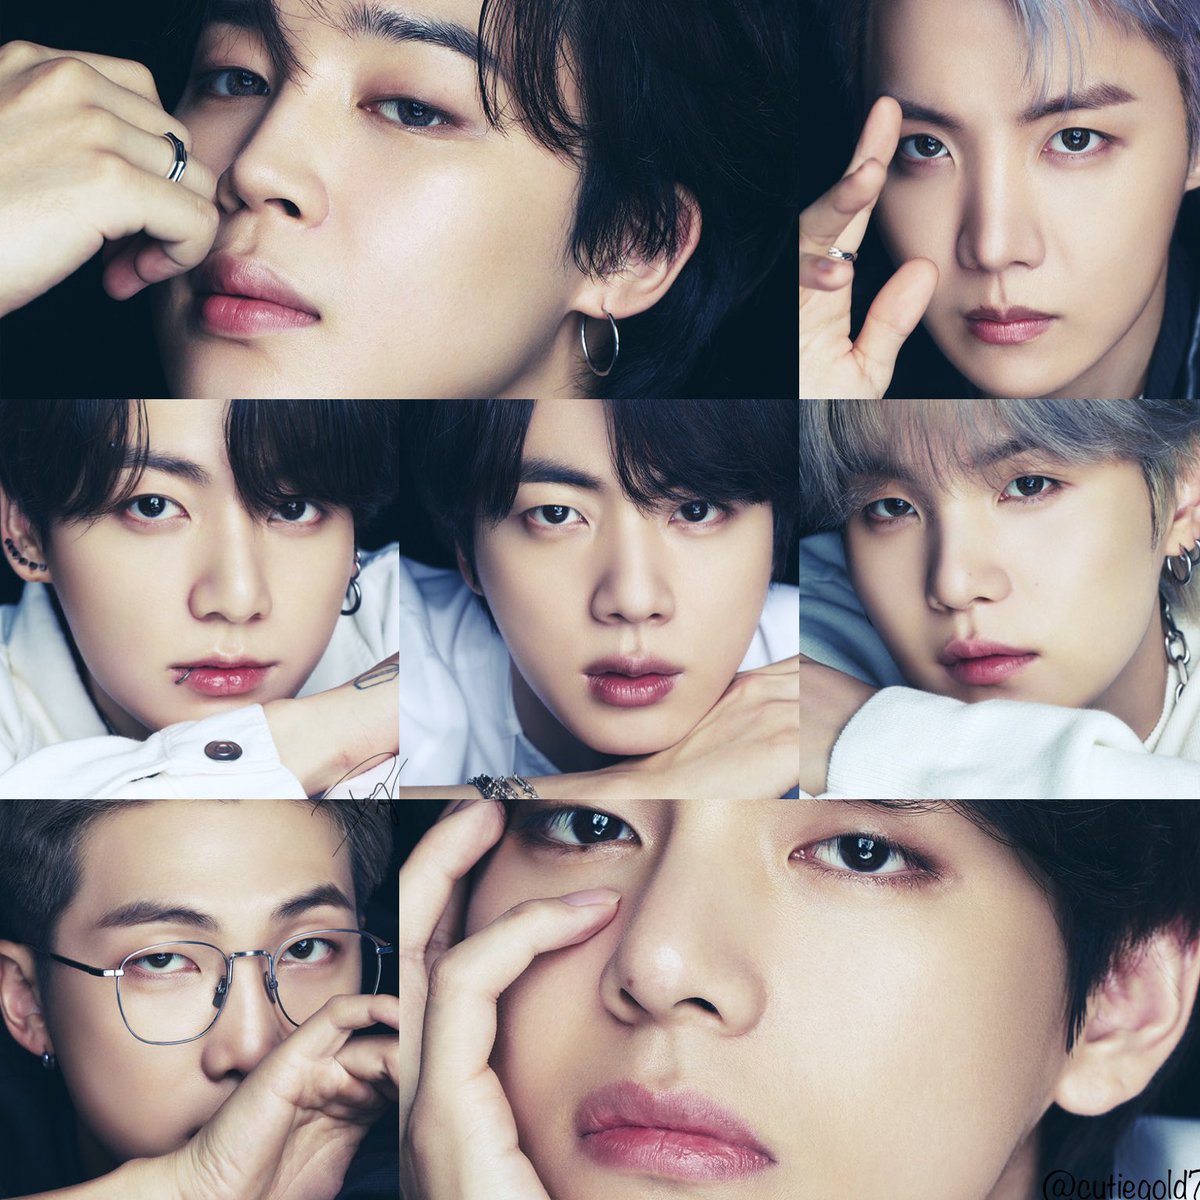 @Sunn_003 @bts_bighit @YouTube would you please give me these ot7 pics seperately? 🥺🥺🥺